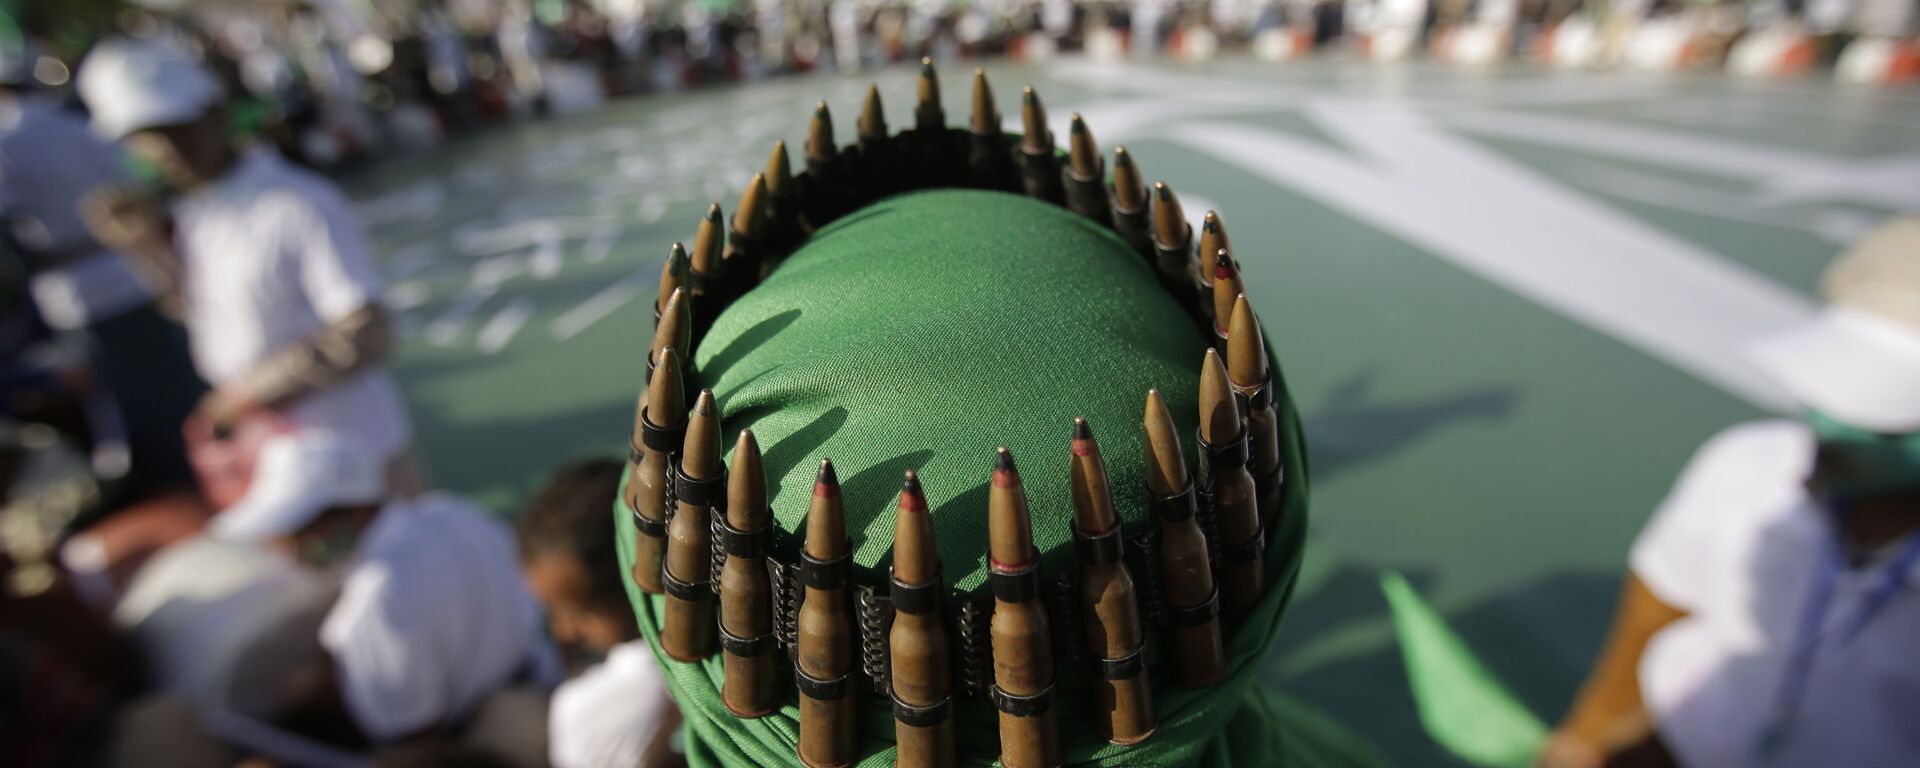 A supporter of Shiite rebels, known as Houthis, with an ammunition belt placed on his head attends a celebration of Moulid al-nabi, the birth of Islam's prophet Muhammad in Sanaa, Yemen, Saturday, Nov. 9, 2019 - Sputnik International, 1920, 15.03.2024